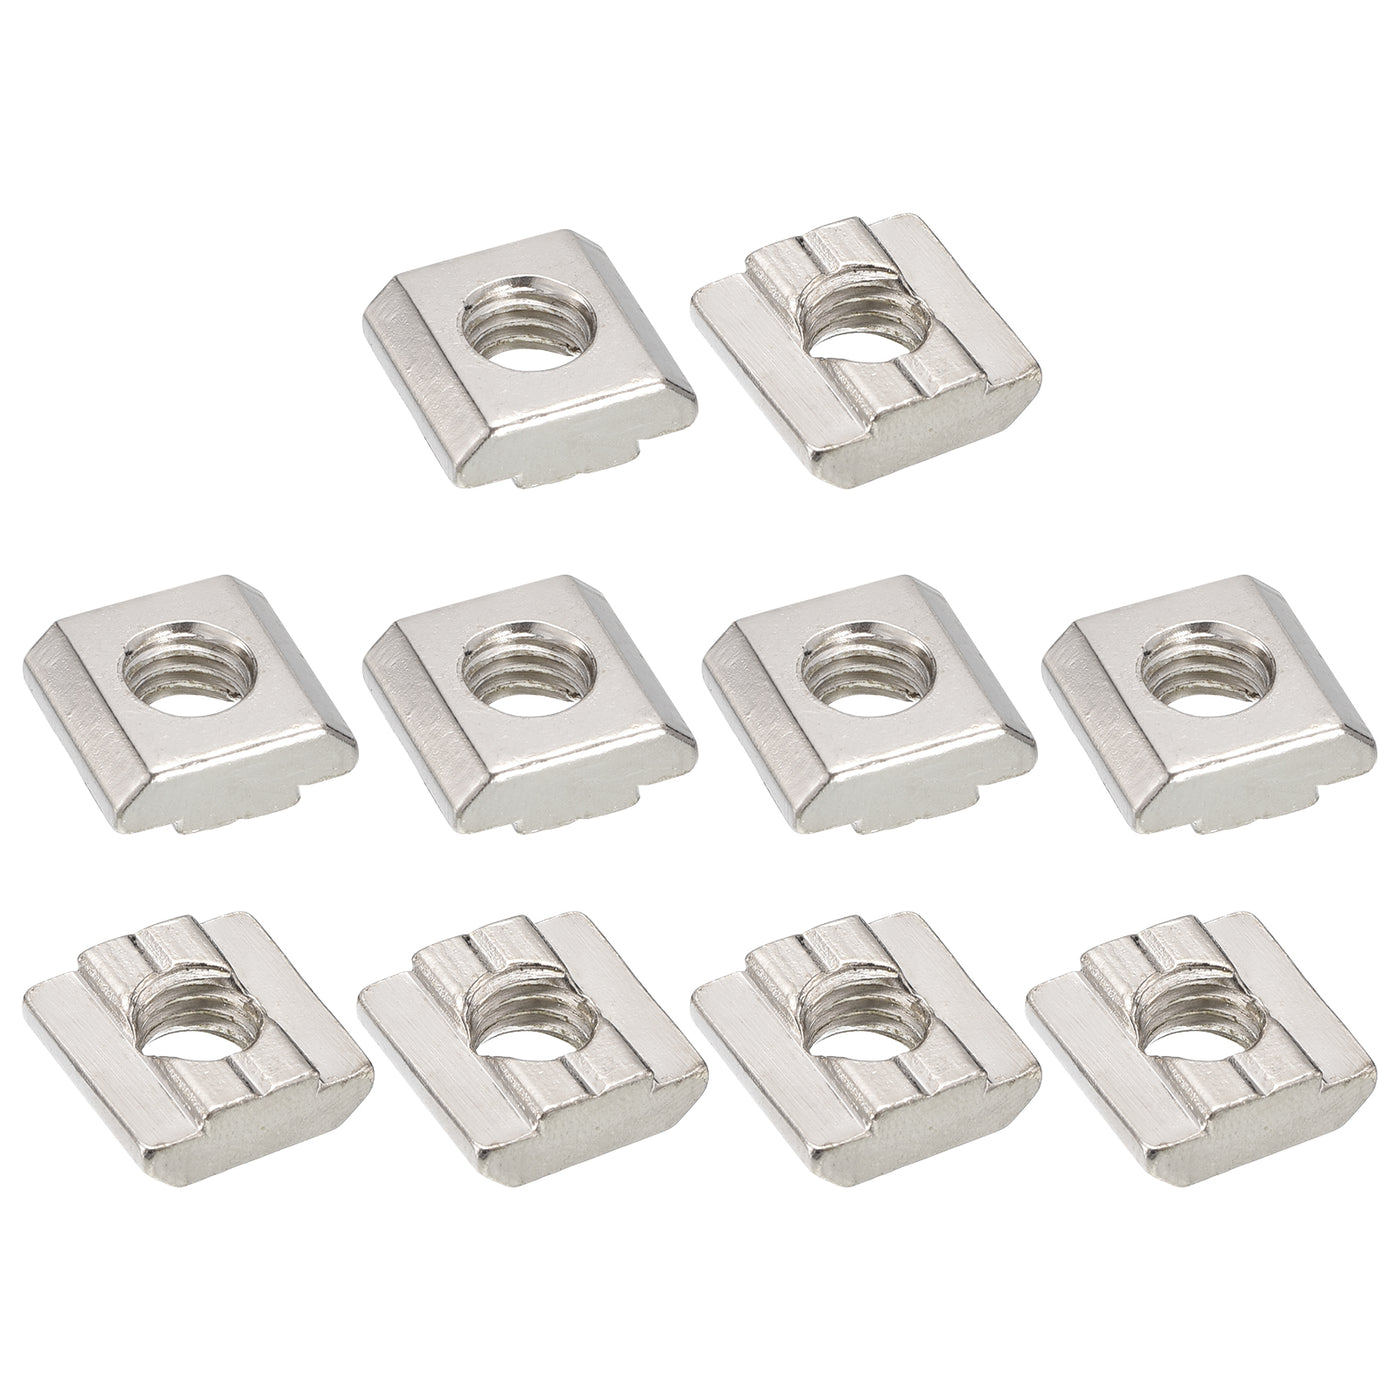 uxcell Uxcell T Nuts, 50pcs - Nickel Plated Carbon Steel T Slot Bolts, 3030 Series M8 Hammer Head Fastener, Sliding T Nuts for Aluminum Extrusion Profile (Silver)